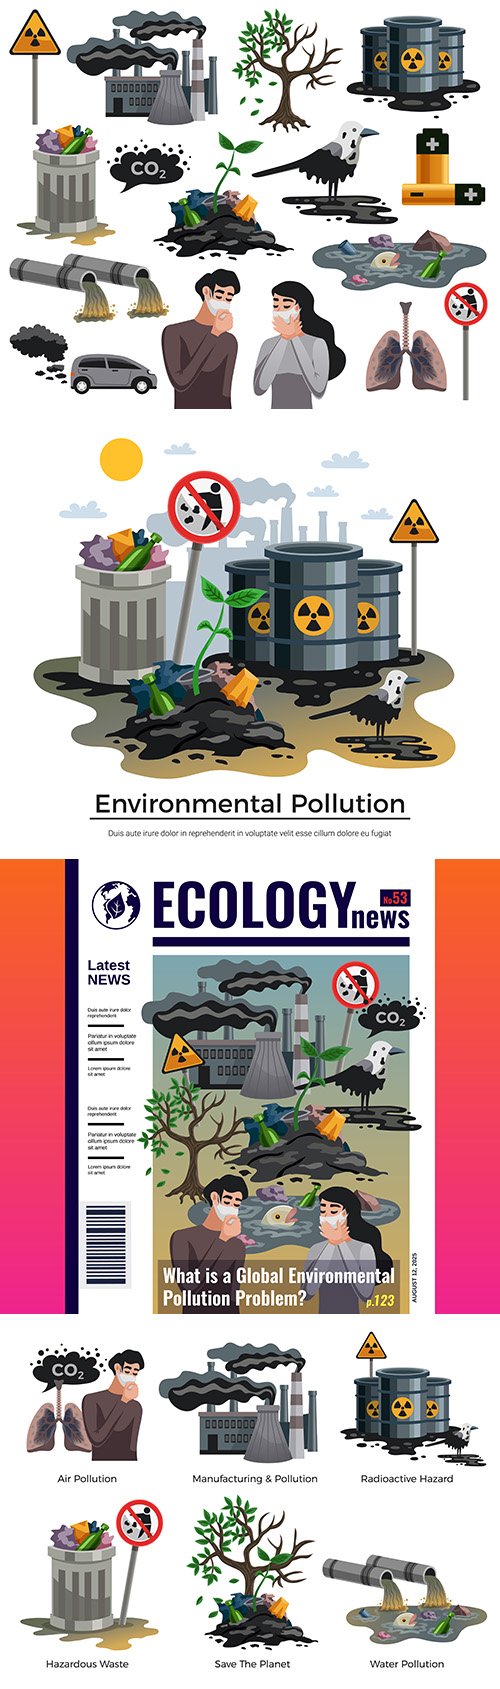 Pollution and environmental disasters illustration